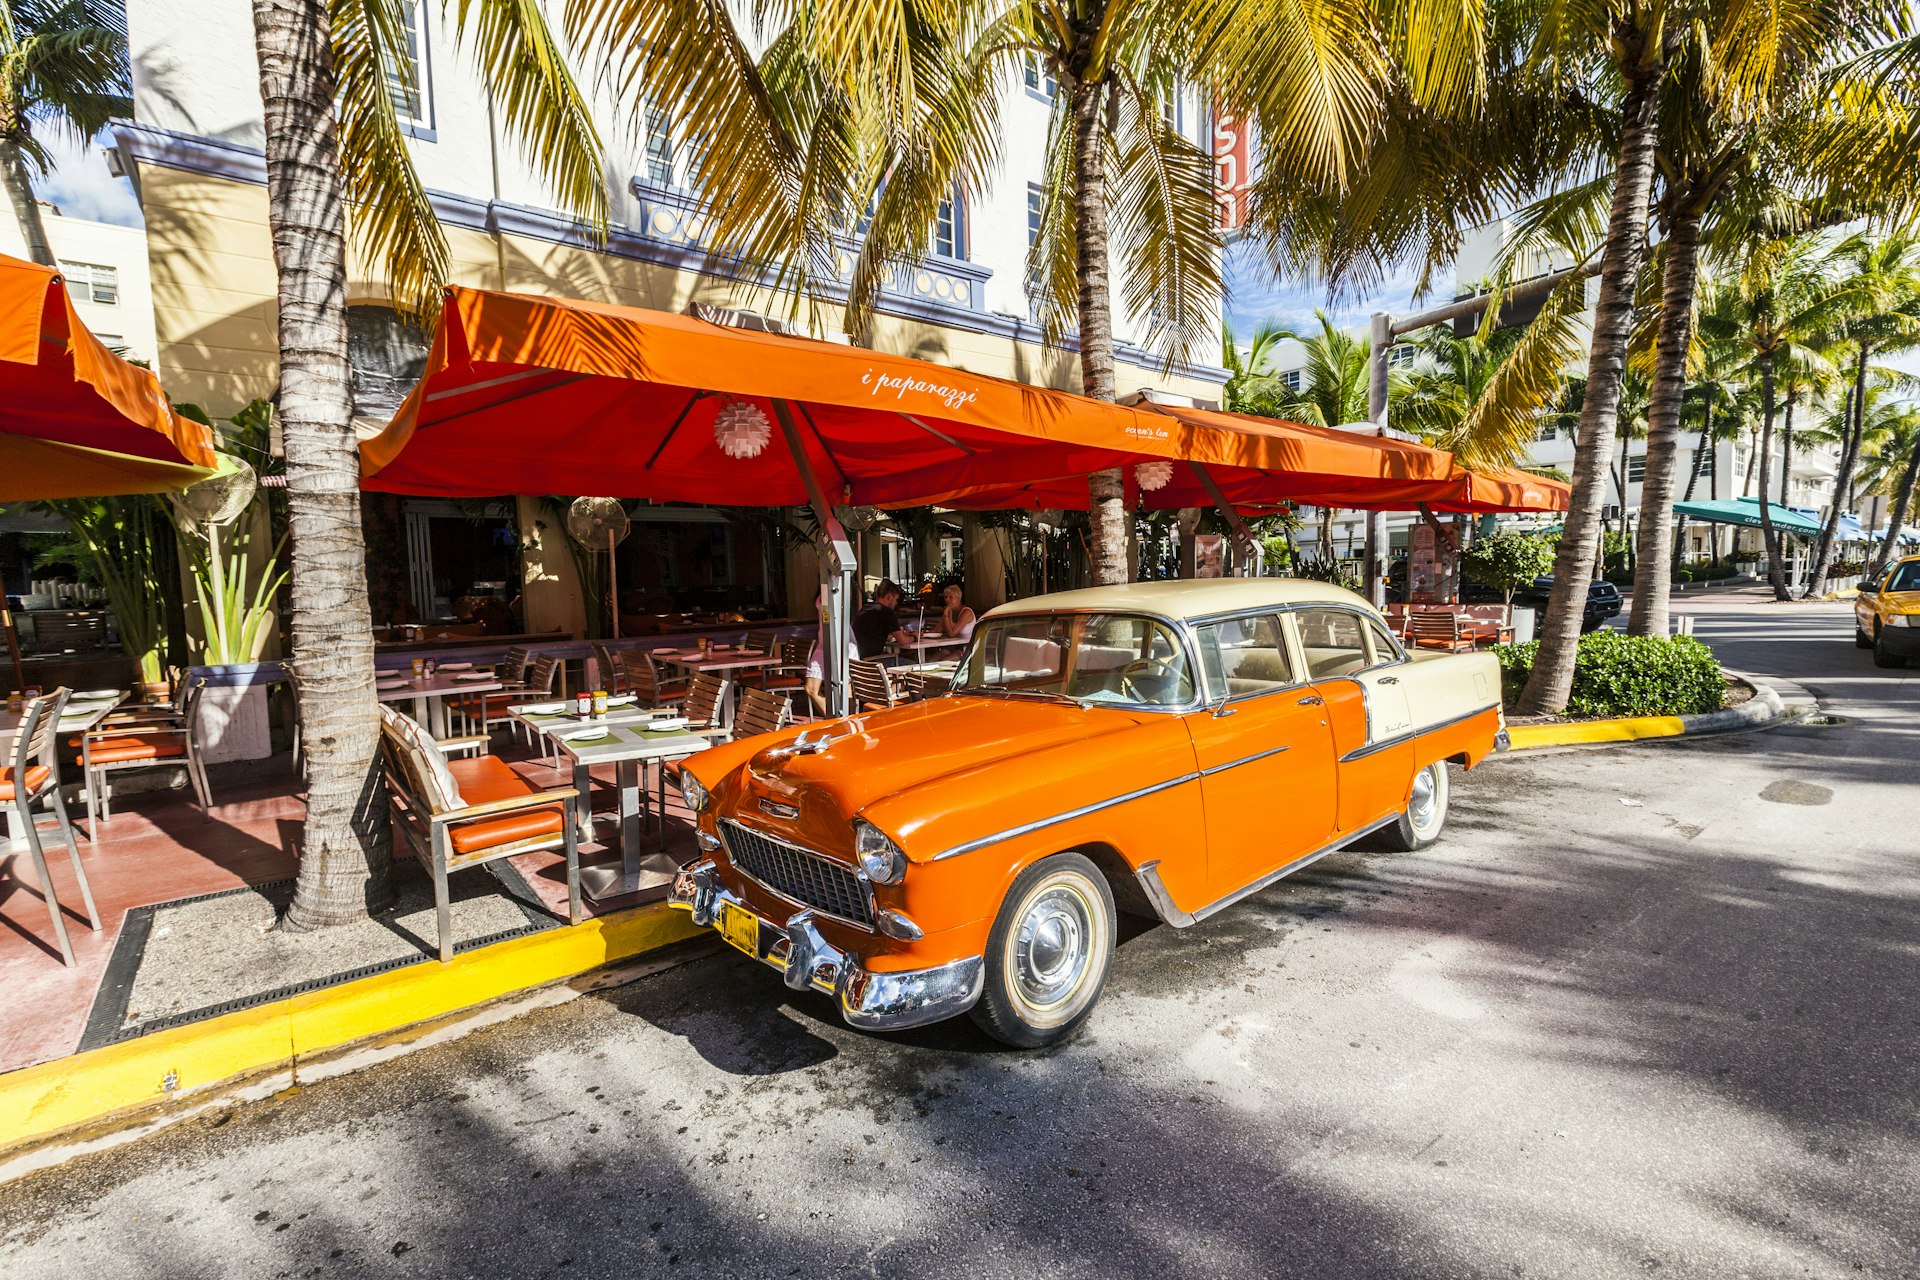 The Art Deco Edison Hotel and a classic Oldsmobile car on Ocean Drive, South Beach, Miami, USA. Classic cars are allowed to park at yellow line.